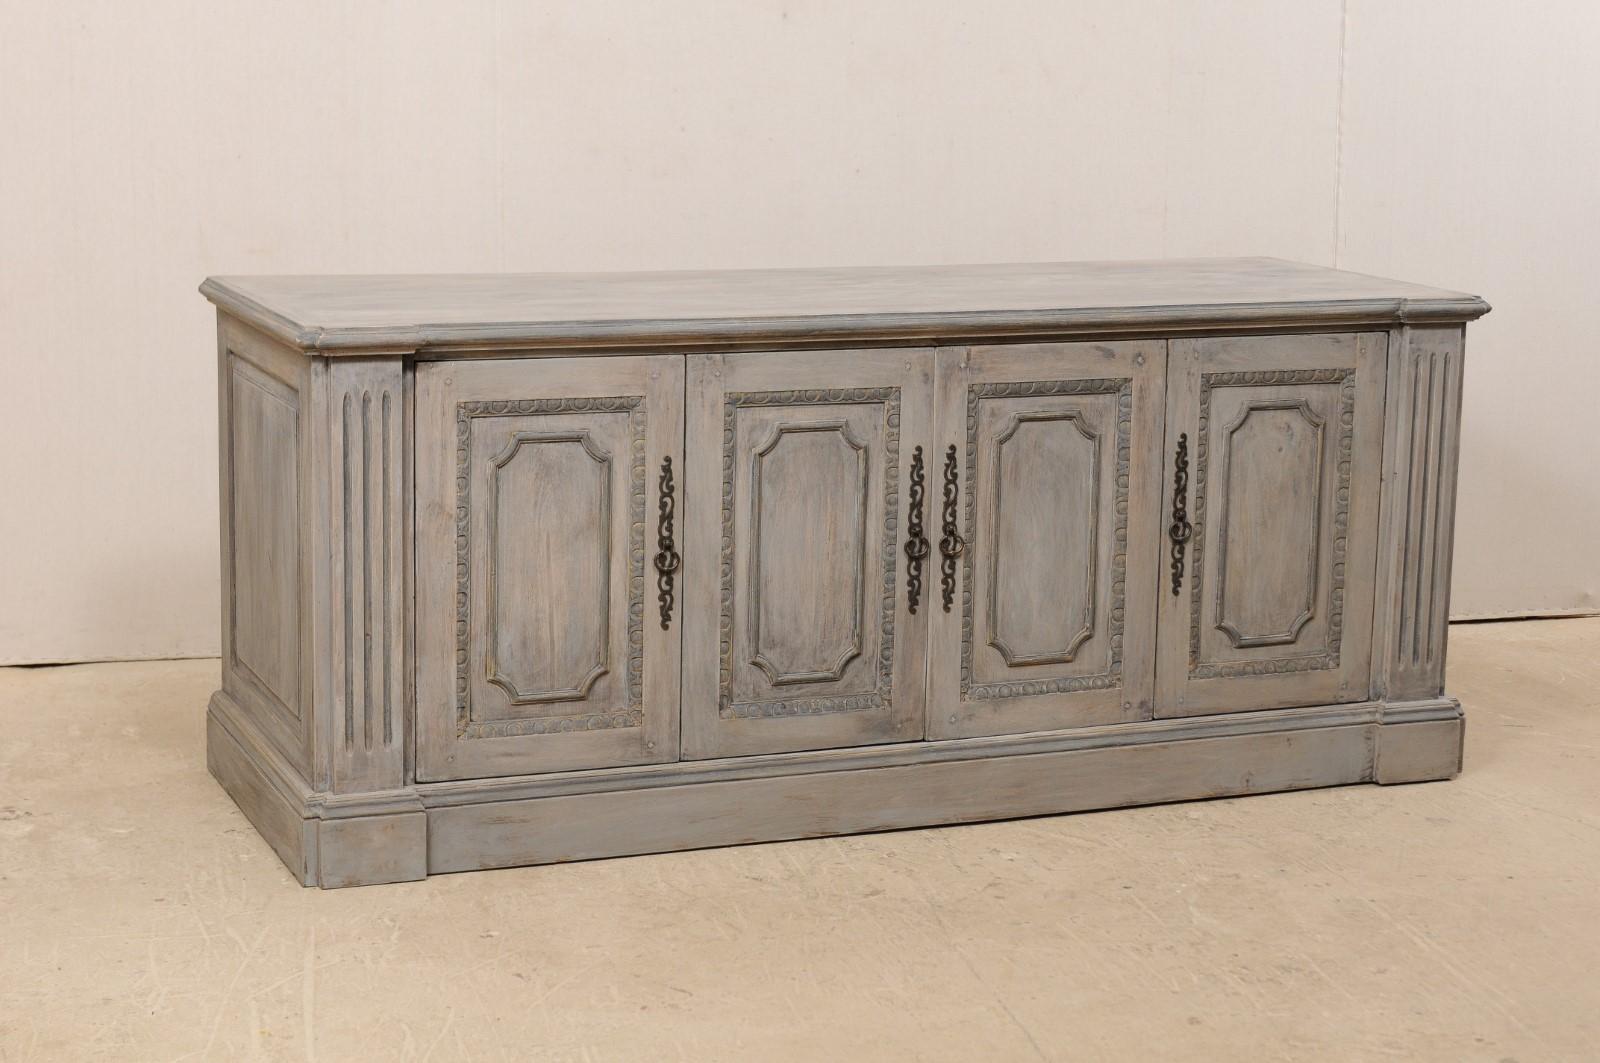 A vintage American painted wood buffet console cabinet. This vintage Italian style buffet cabinet, just over 7 feet in length, features four decorative recessed paneled doors, with egg and dart trim, set within fluted column-style side posts. The